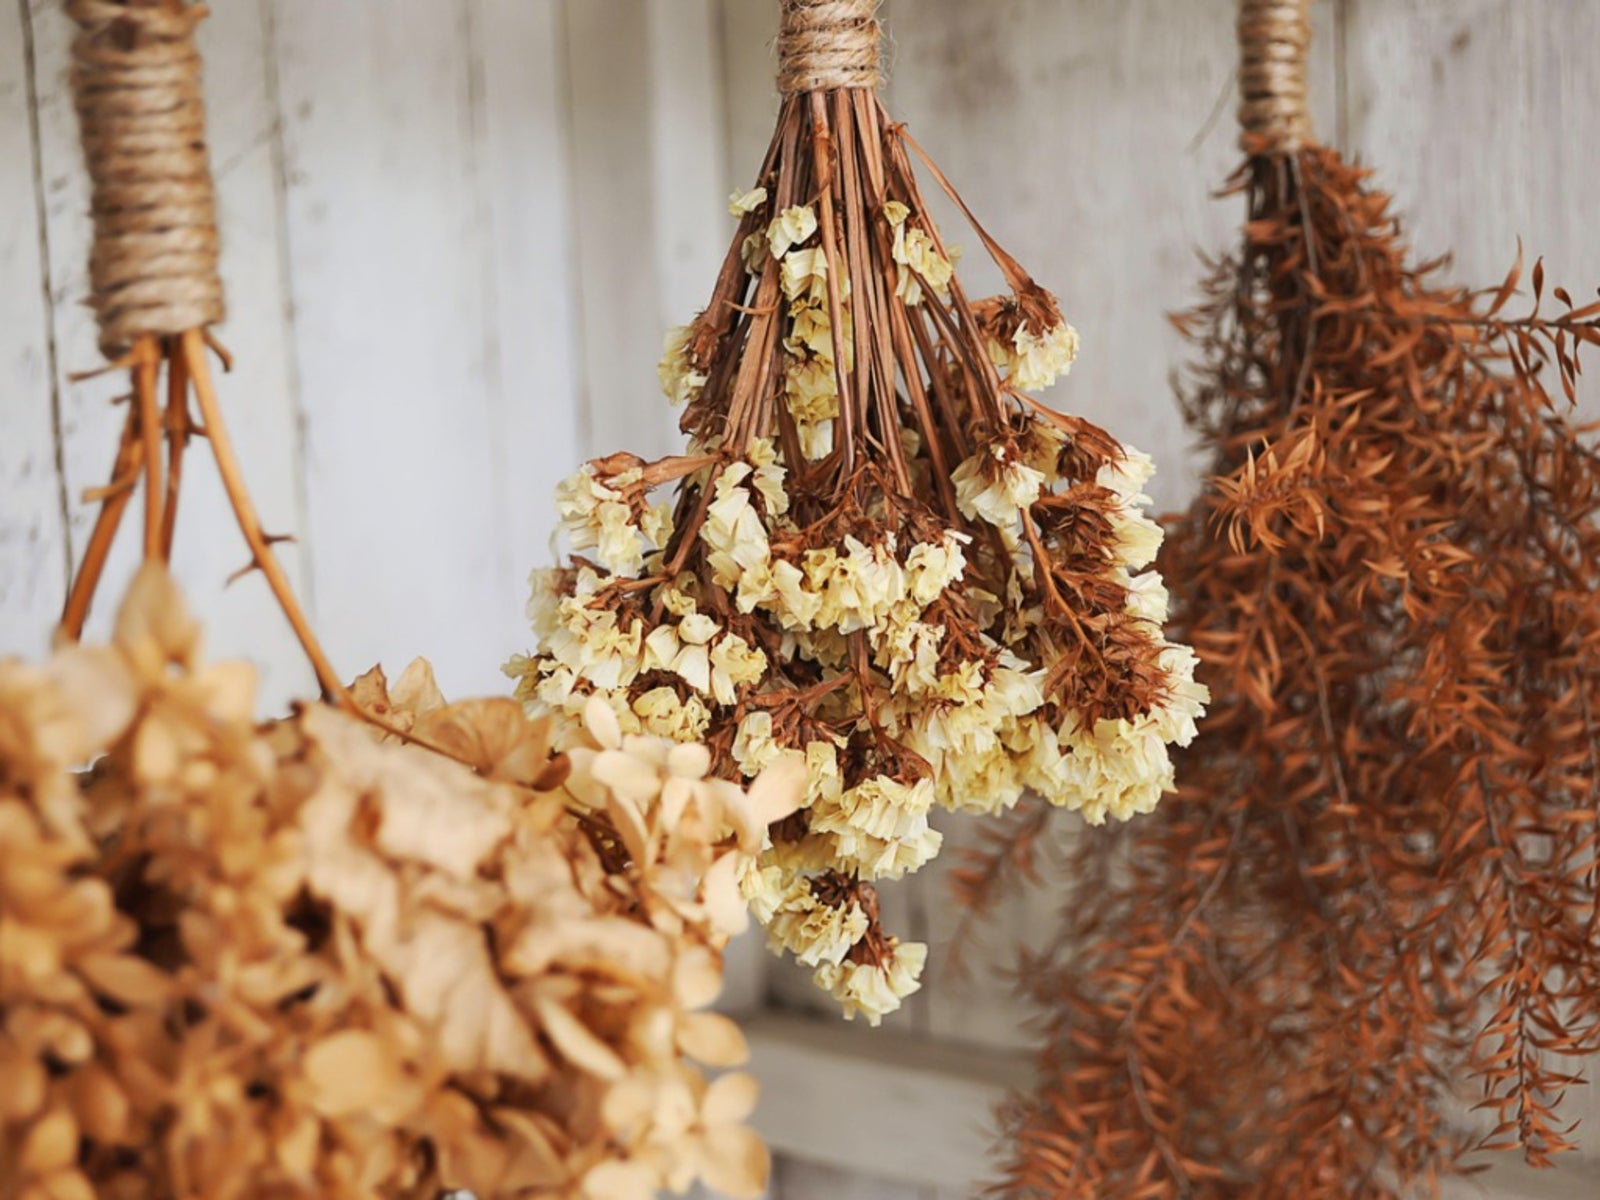 Dried Flower Arrangements - Growing Plants And Flowers To Dry